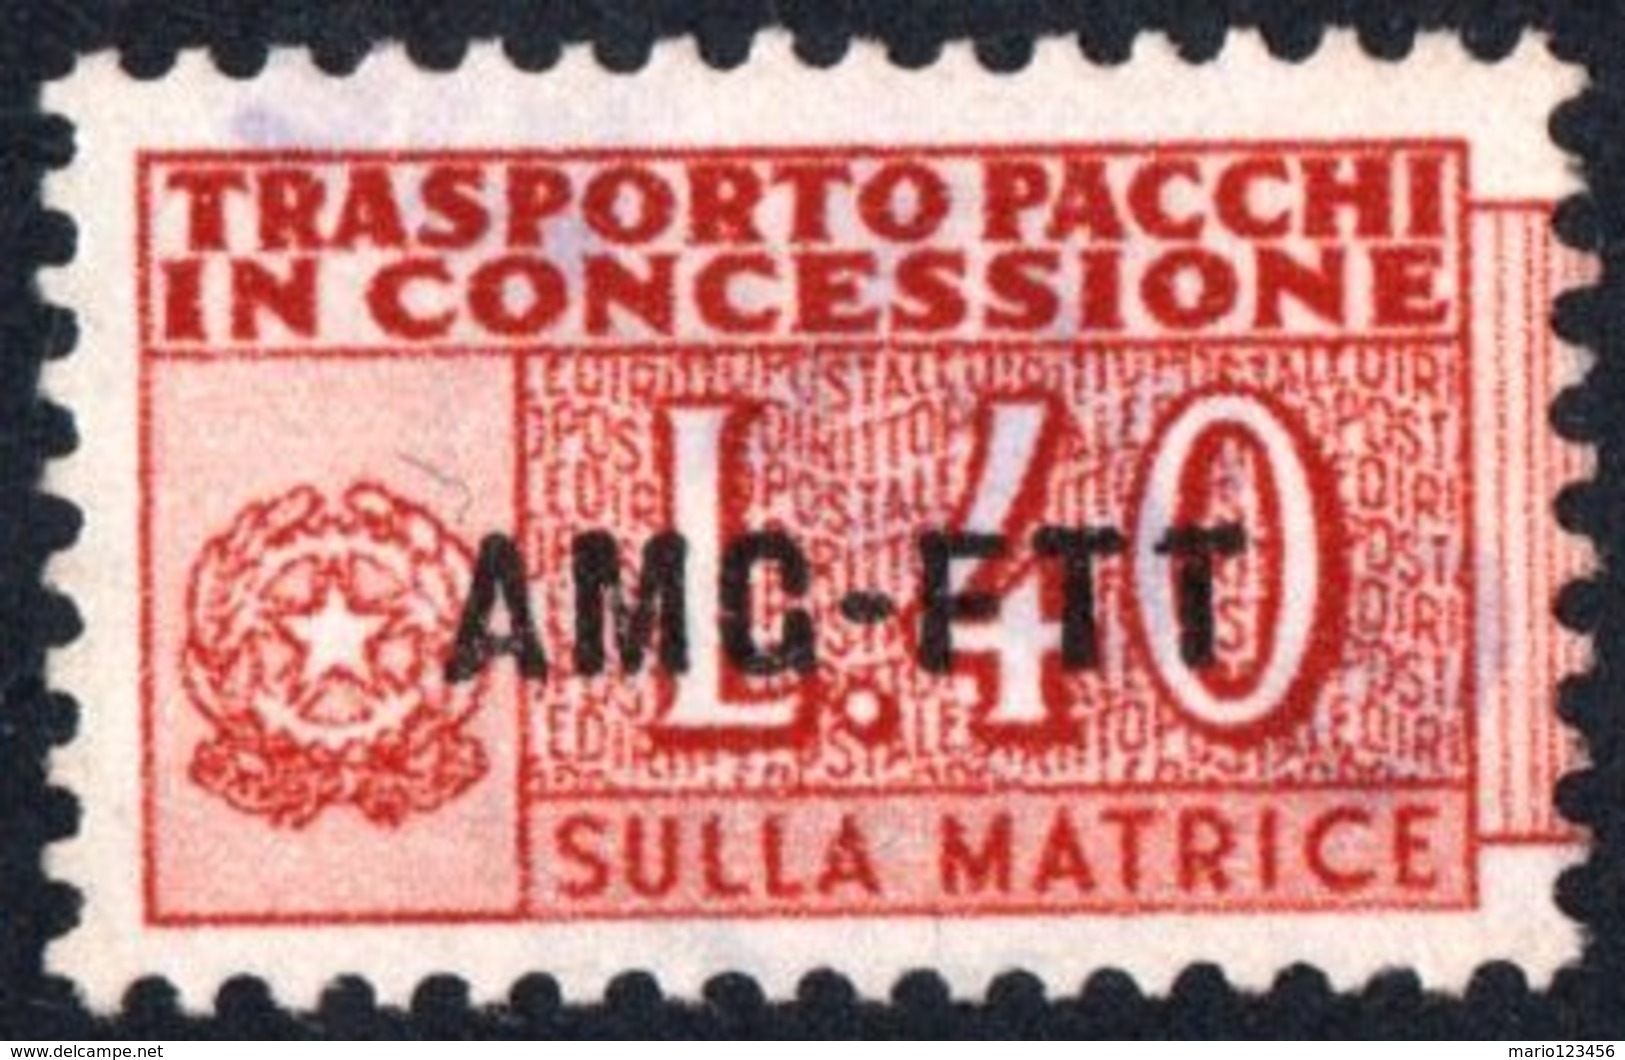 TRIESTE, ZONA A, ITALIA, ITALY, PACCHI IN CONCESSIONE, PARCEL TRANSPORT, 1953, FRANCOBOLLO USATO Michel GB1   Scott QY1 - Postal And Consigned Parcels